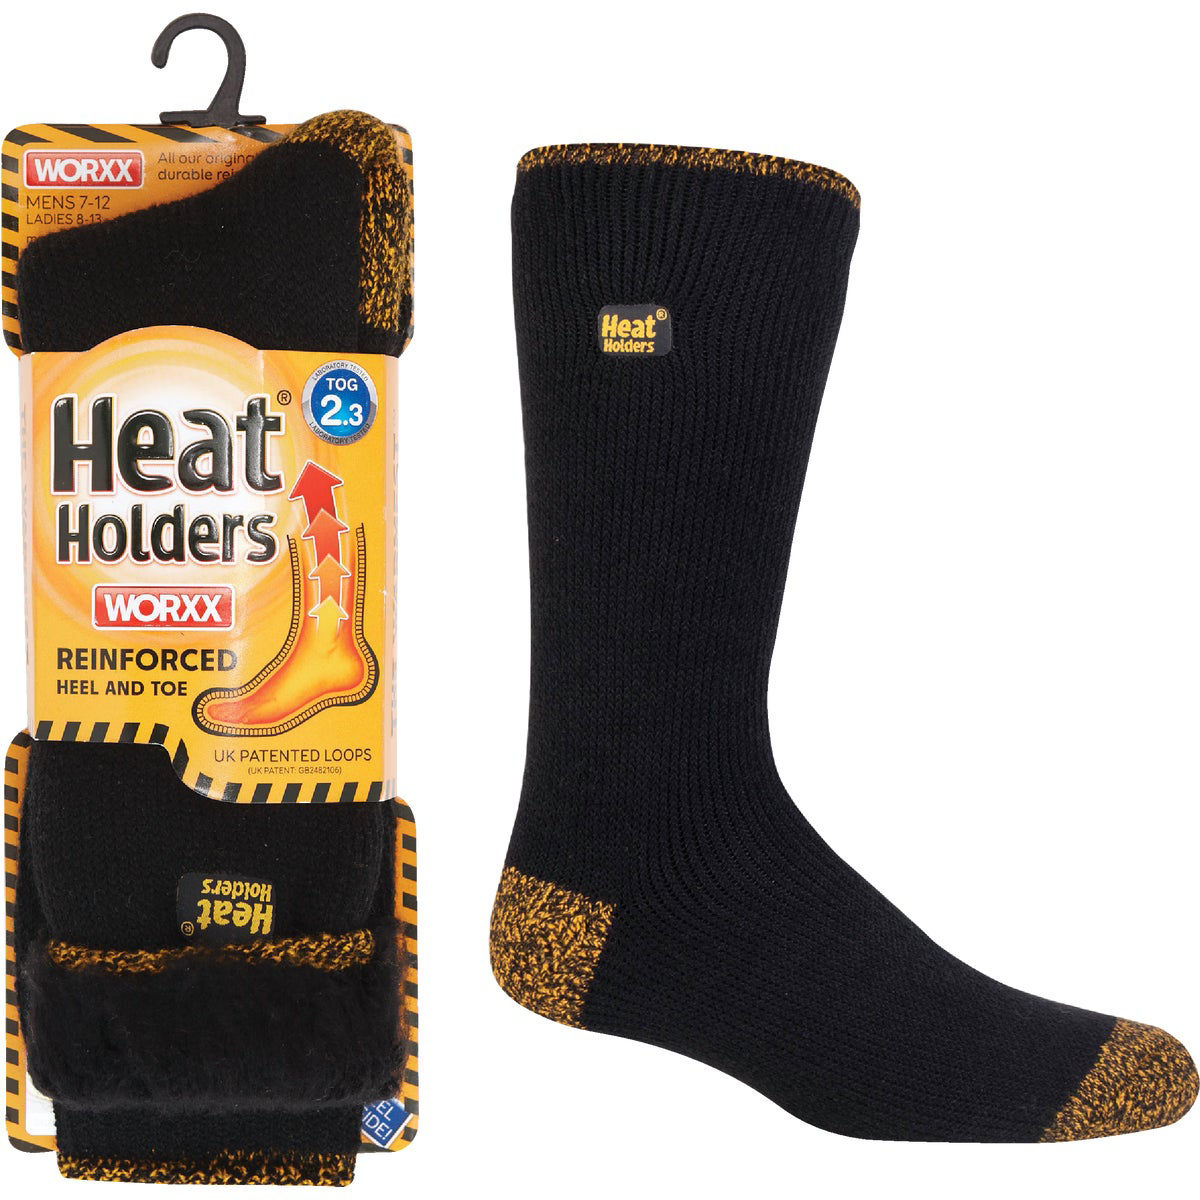 Why Heat Holders are some of the best and warmest winter socks